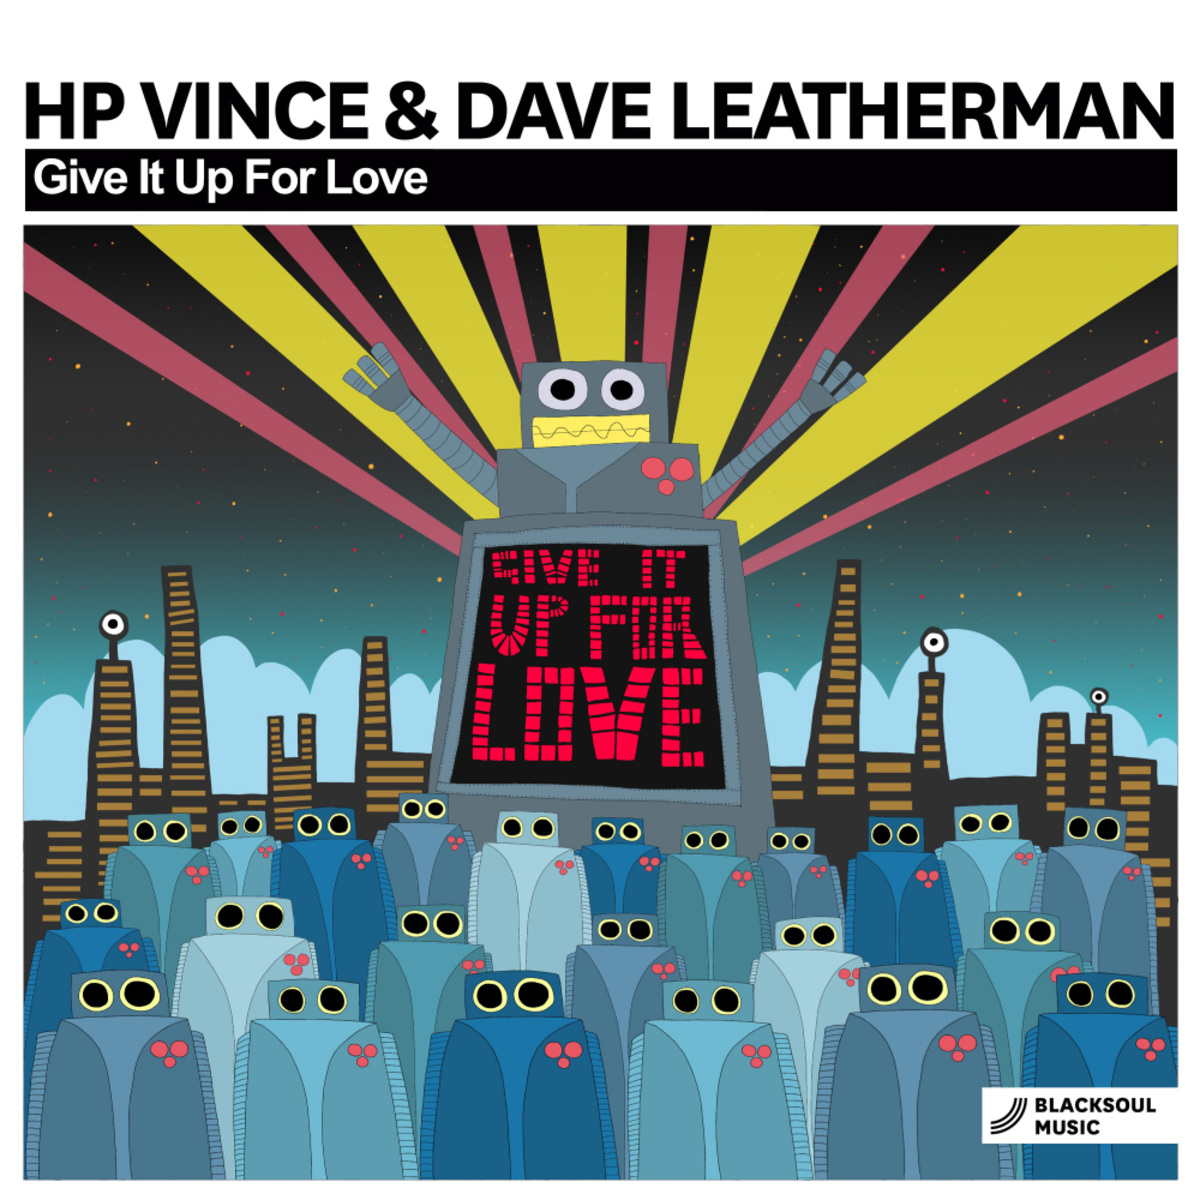 HP Vince & Dave Leatherman - Give It Up For Love / Blacksoul Music